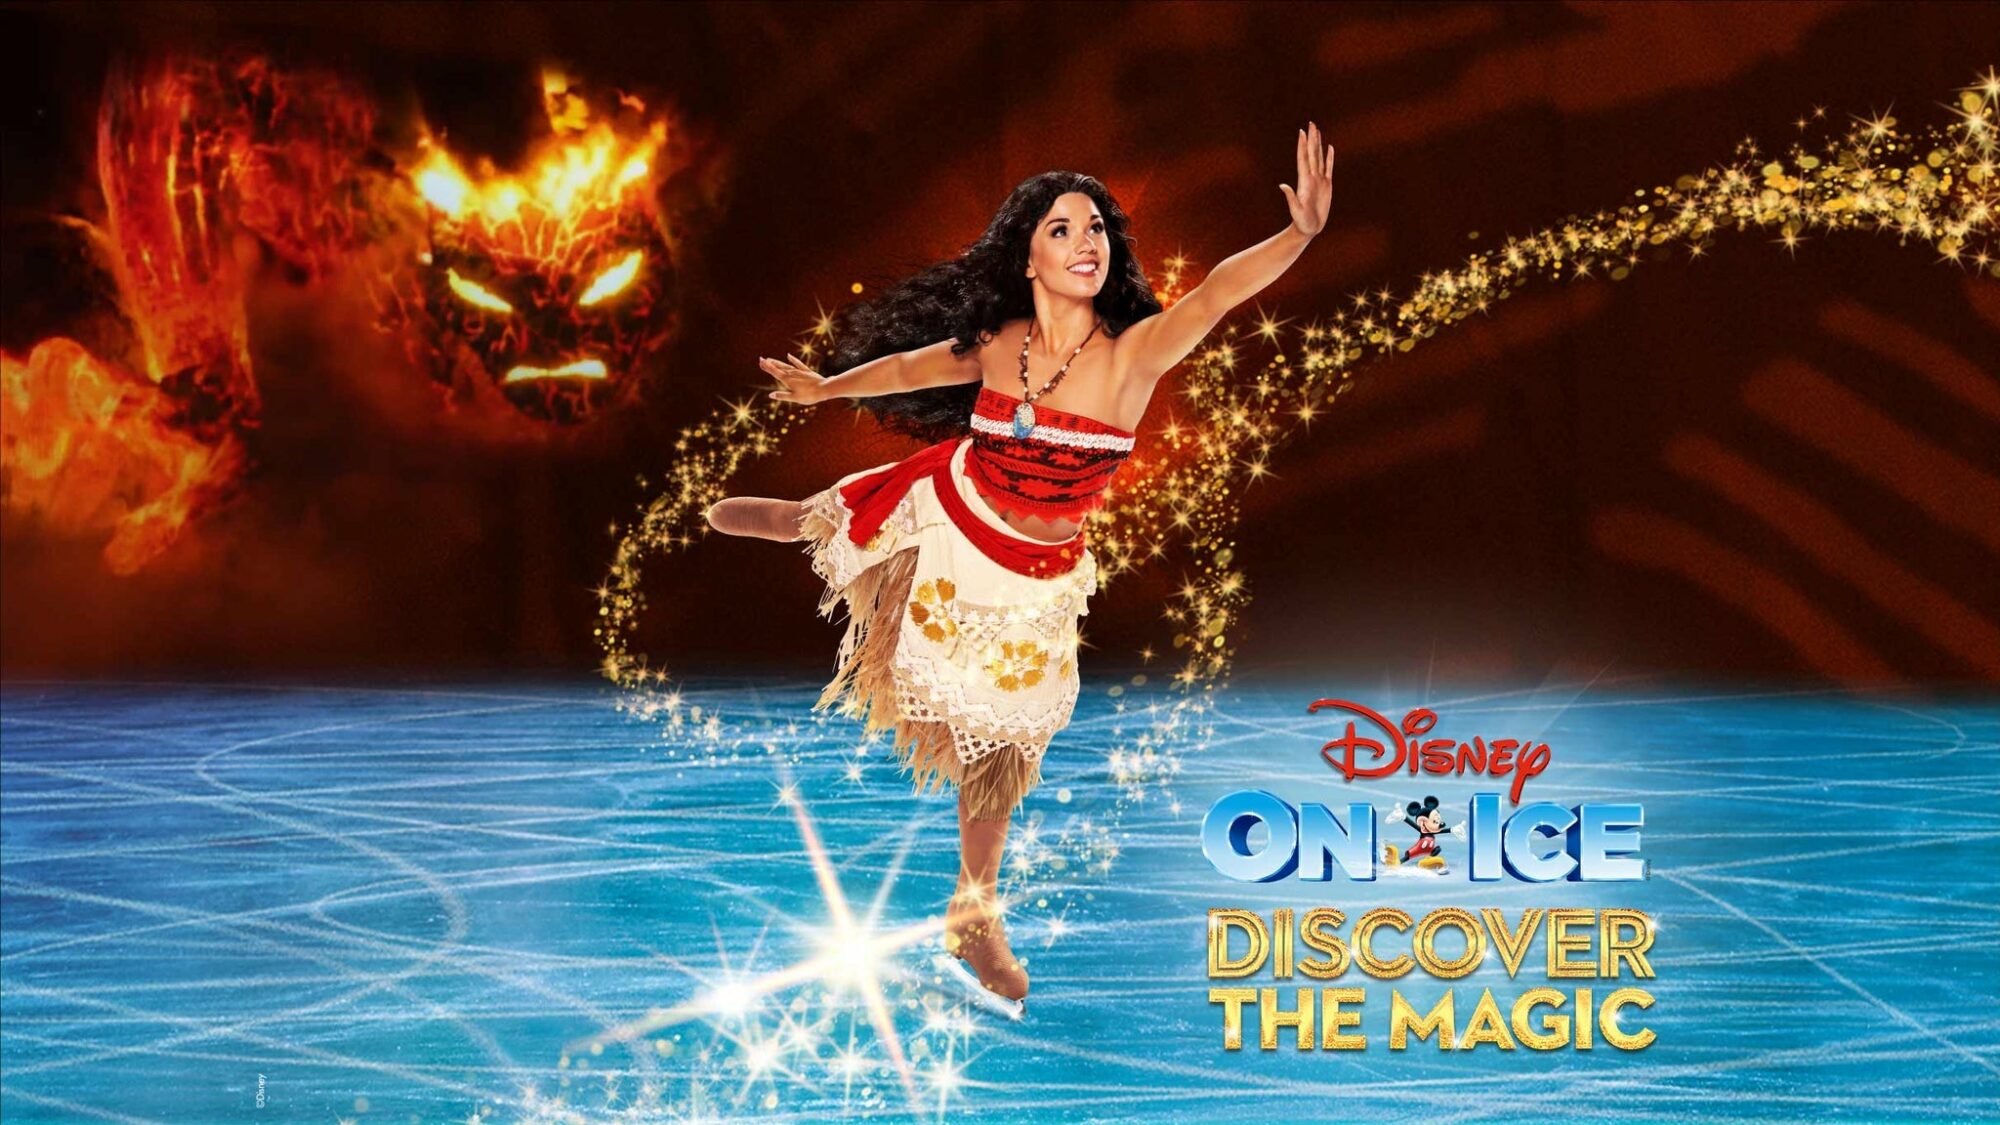 Image name Disney On Ice presents Discover the Magic at First Direct Arena Leeds the 36 image from the post Disney On Ice - the Gallery at First Direct Arena, Leeds in Yorkshire.com.